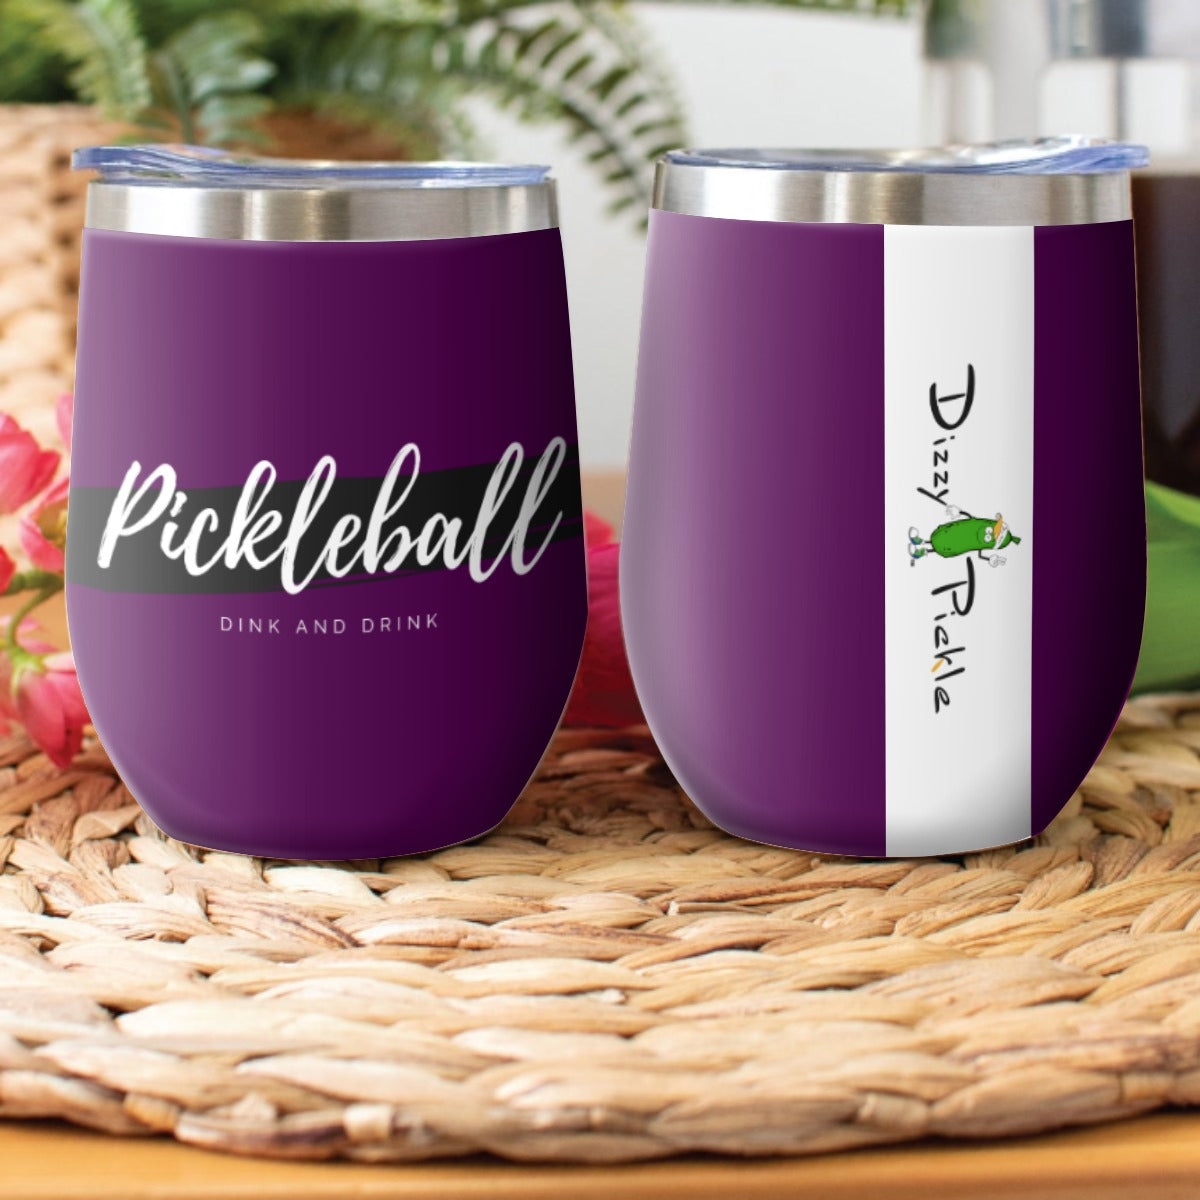 Pickleball Dink and Drink - Royal Plum - Stainless Steel Wine Tumbler by Dizzy Pickle